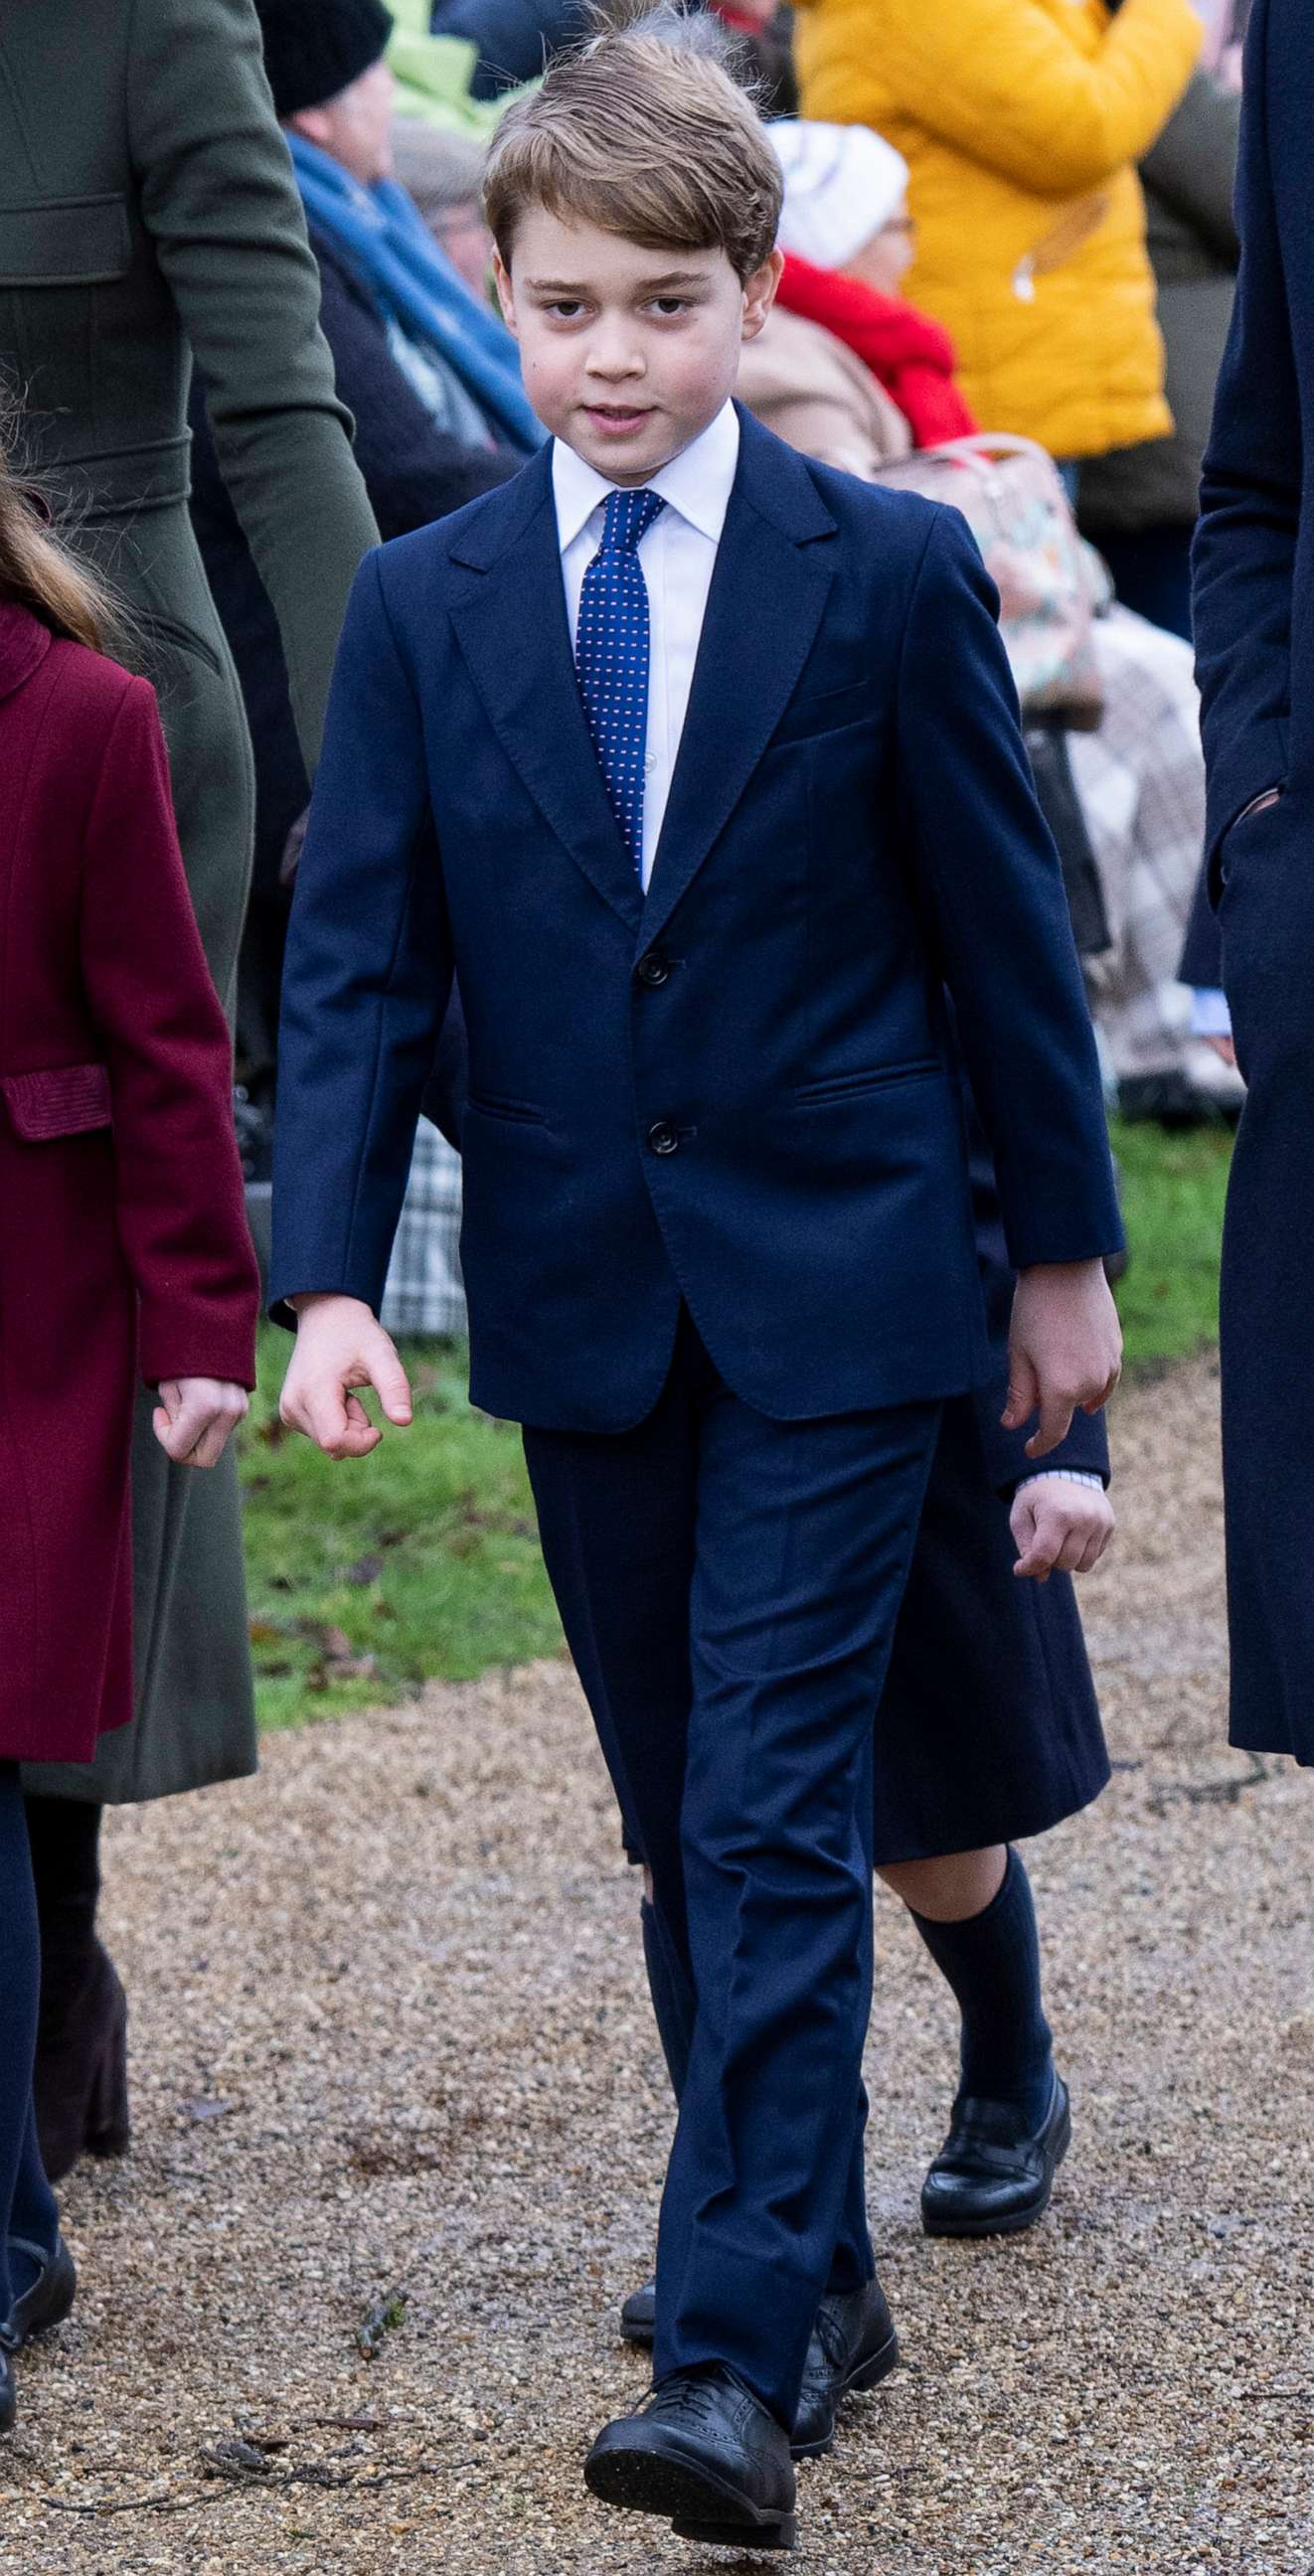 PHOTO: Prince George of Wales attends an event on Dec. 25, 2022, in Sandringham, Norfolk, U.K.